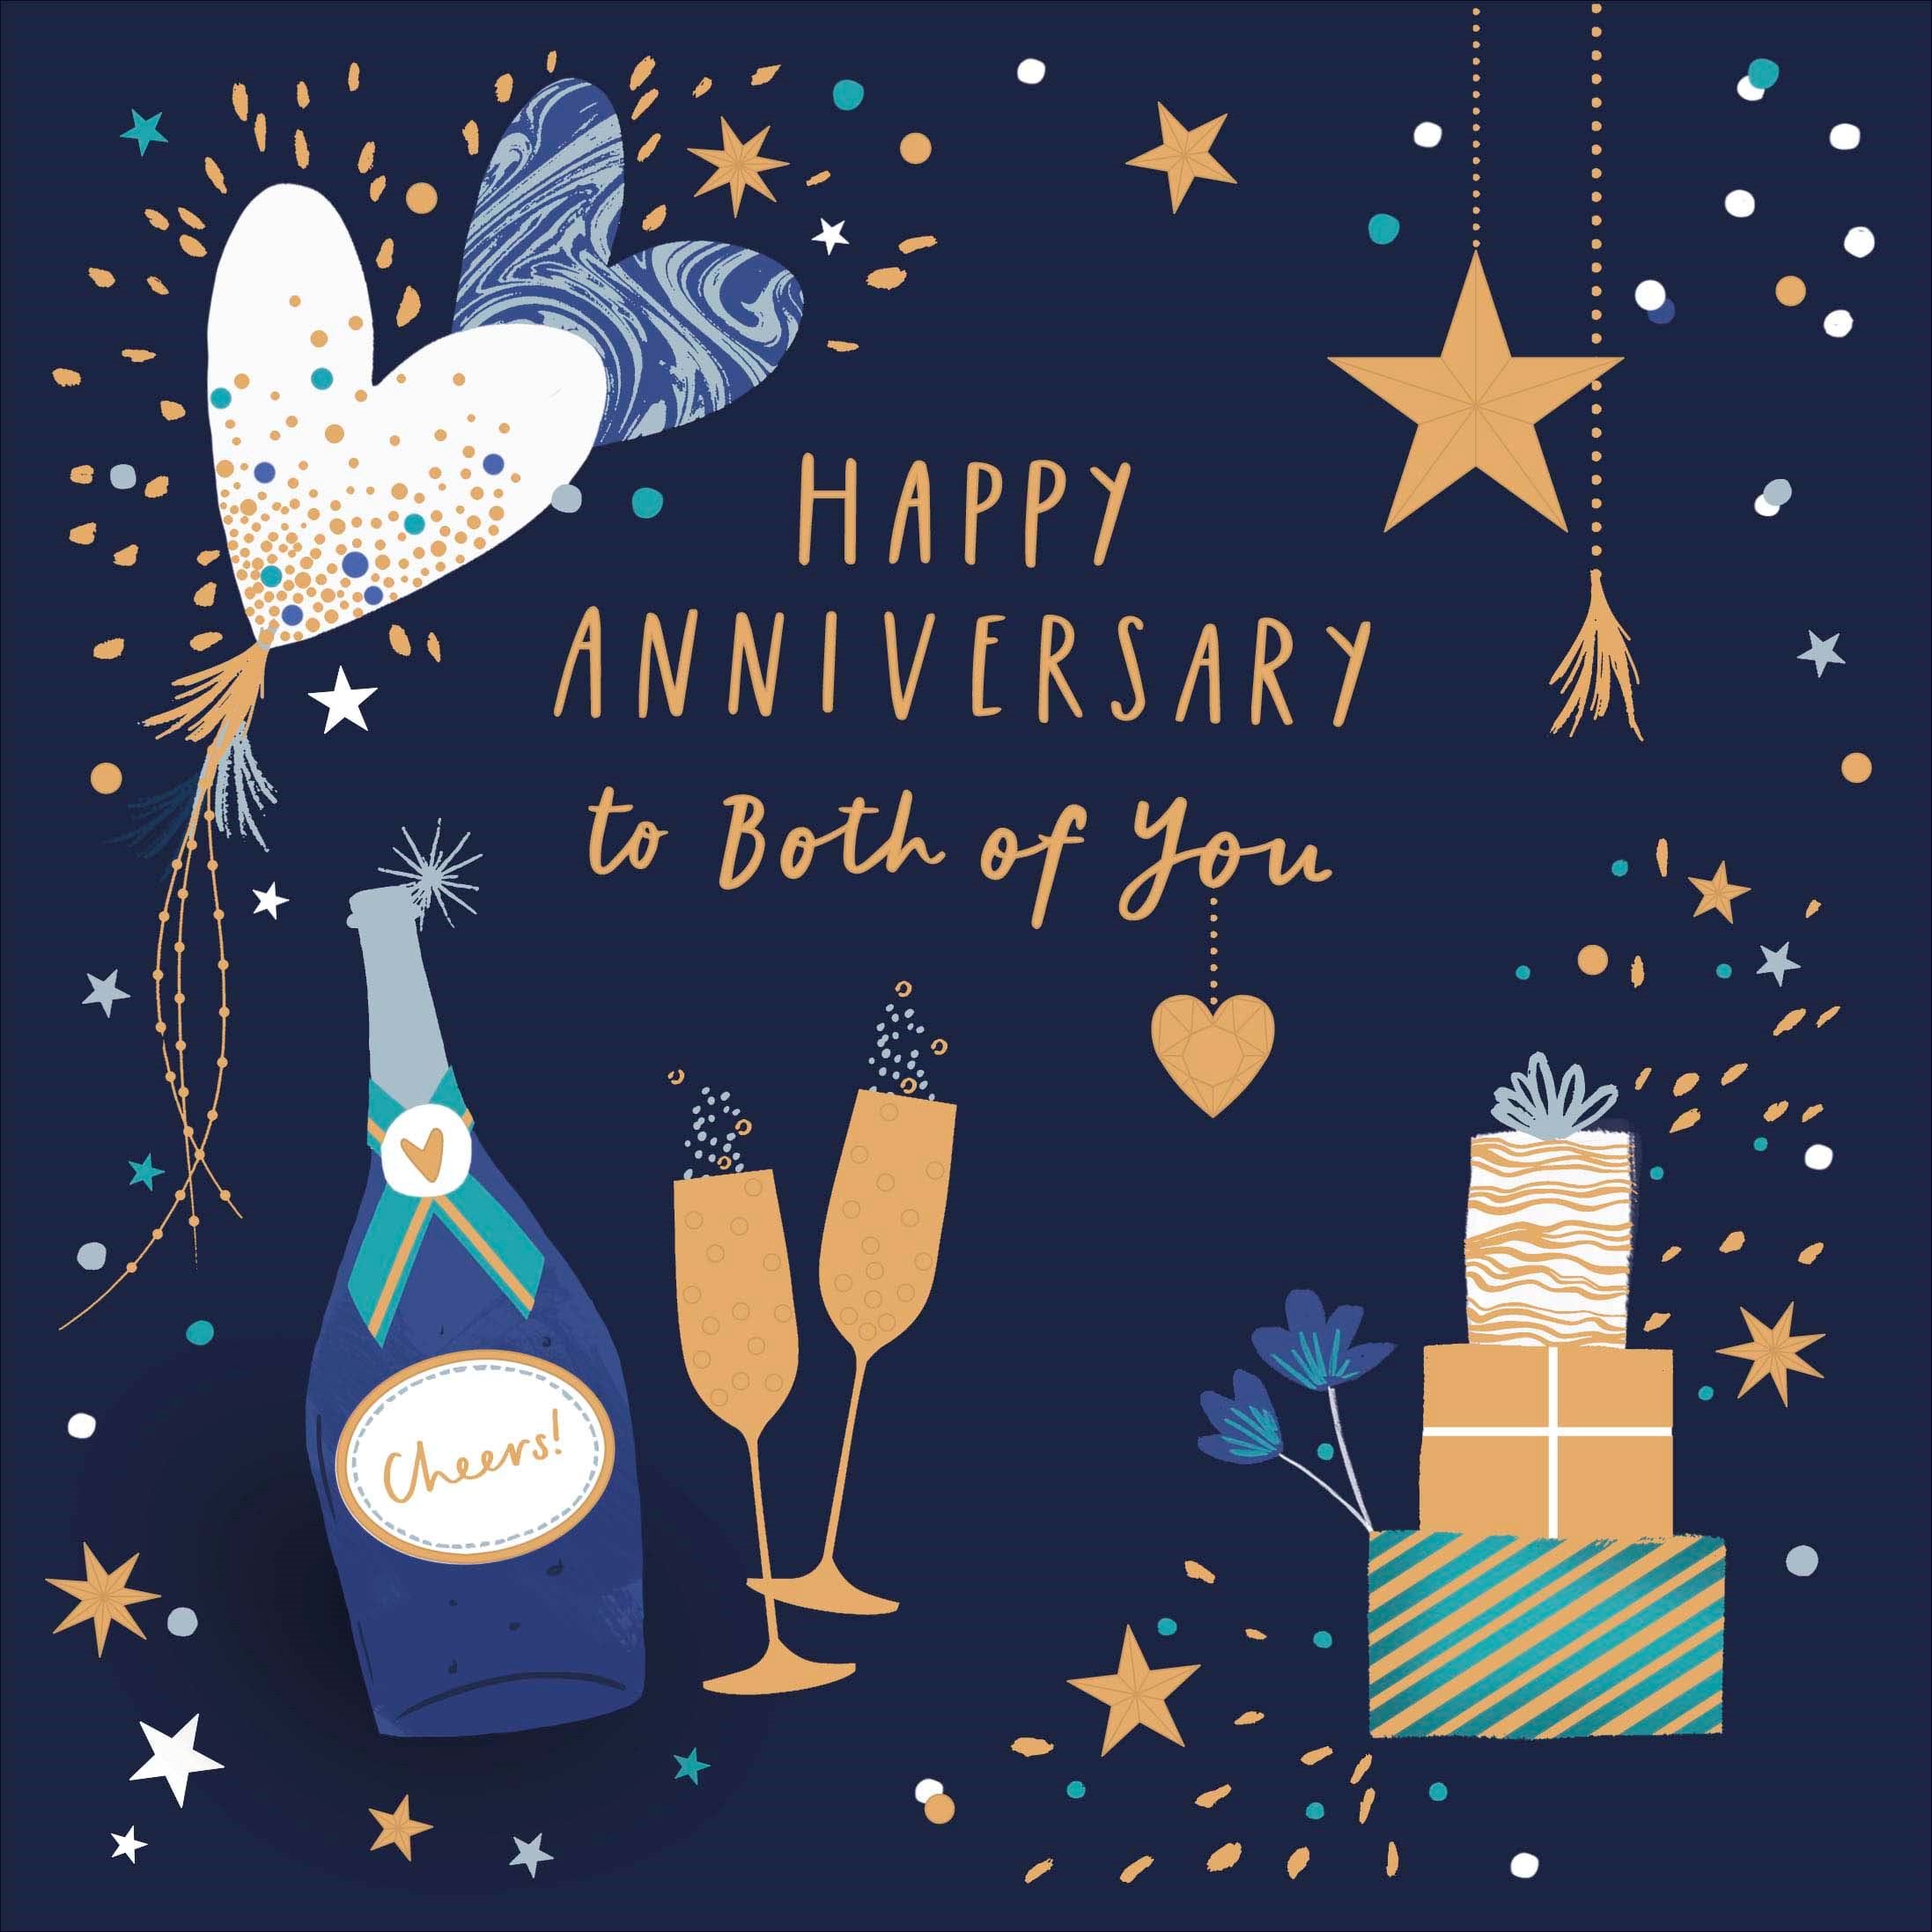 Cheers Both of You Anniversary Card